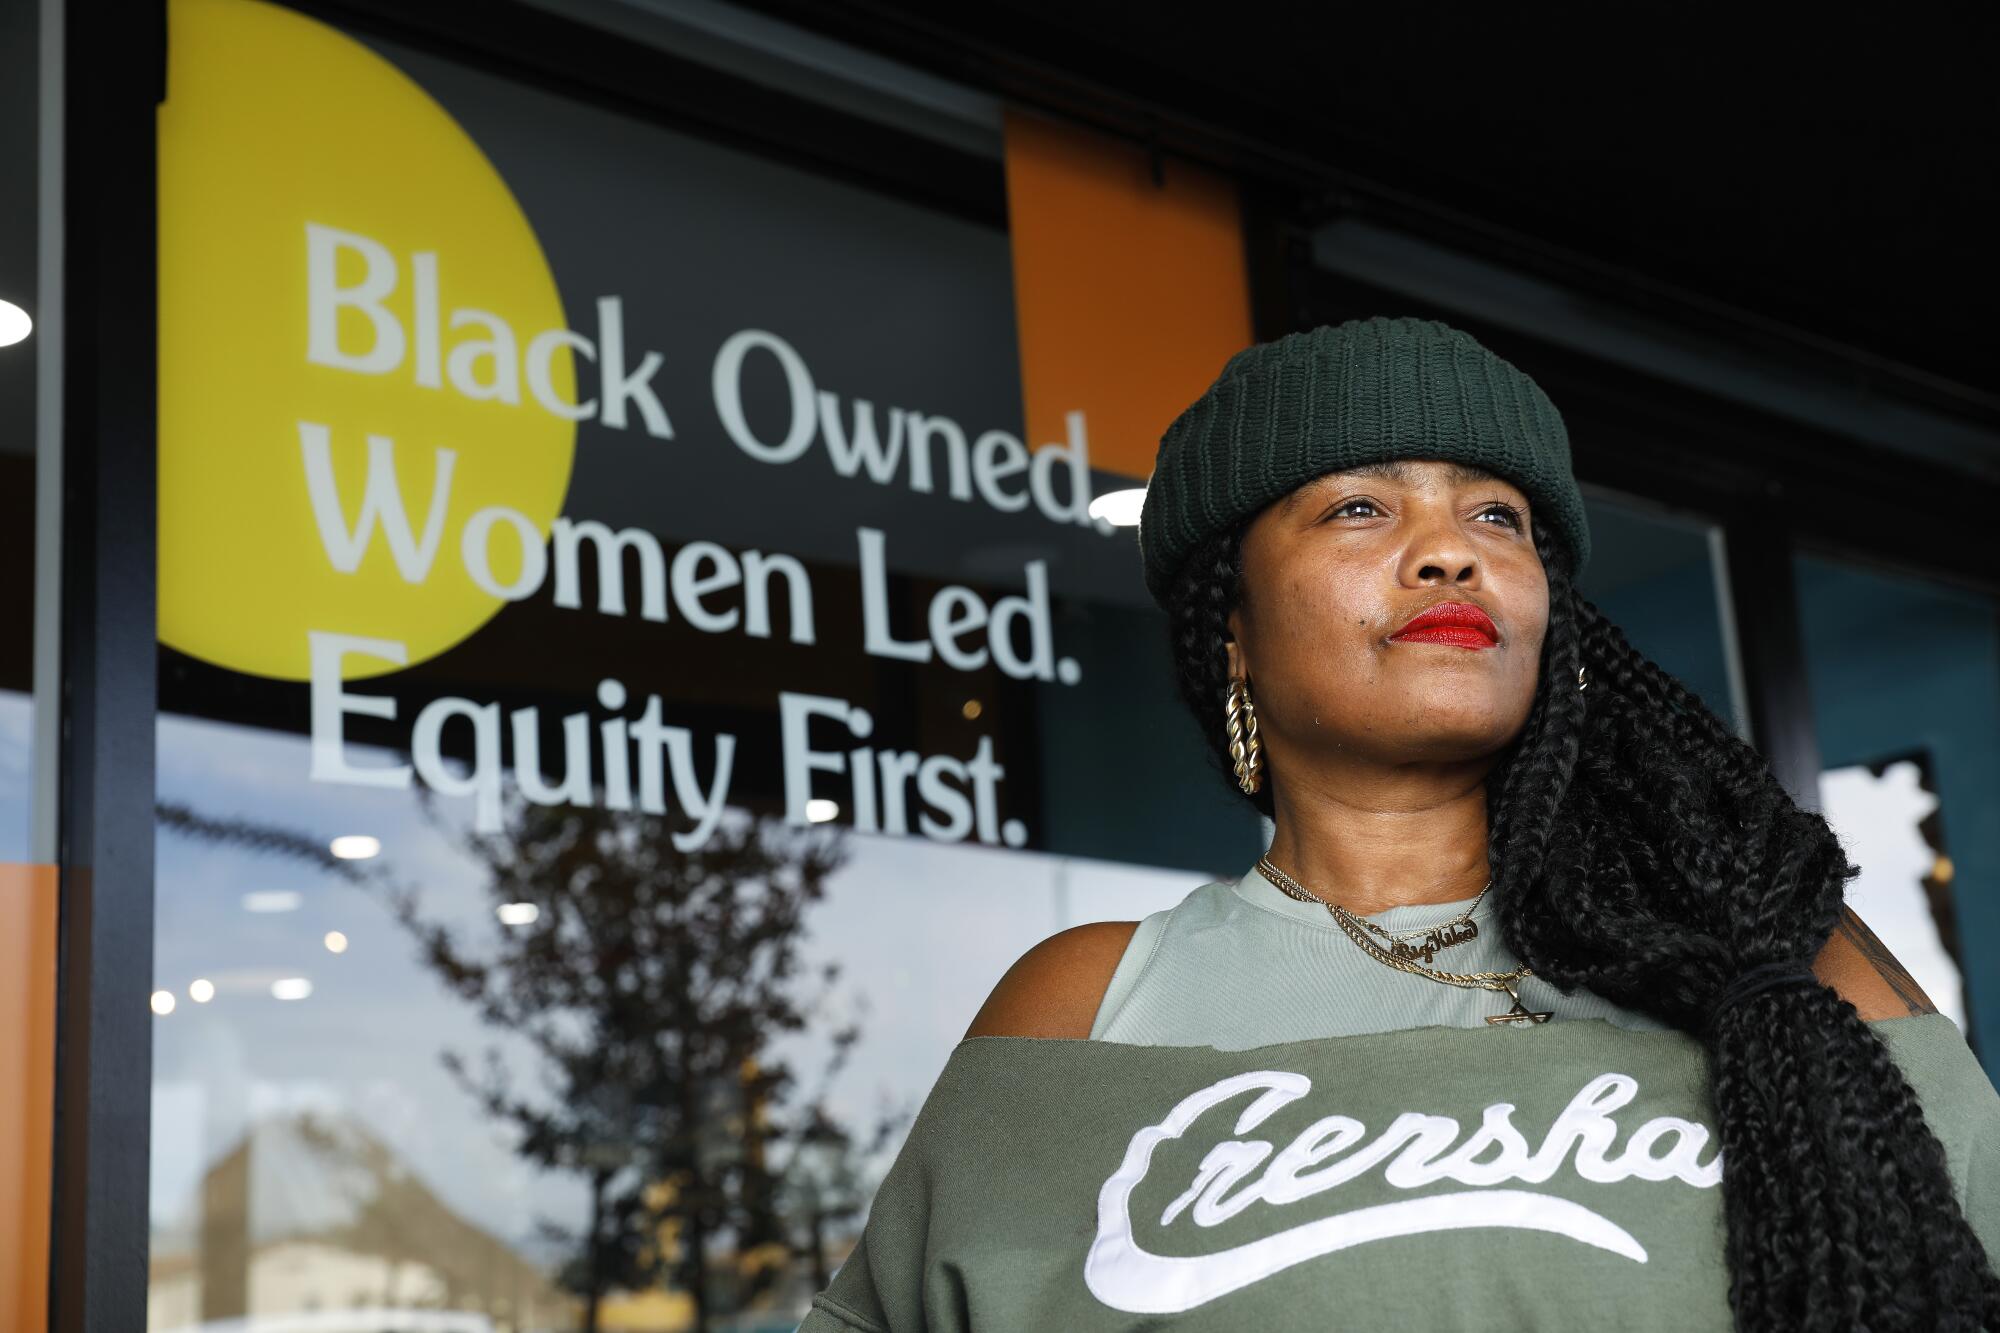 Kika Keith stands outside her business' front window, which has a sign that reads, "Black Owned. Women Led. Equity First."